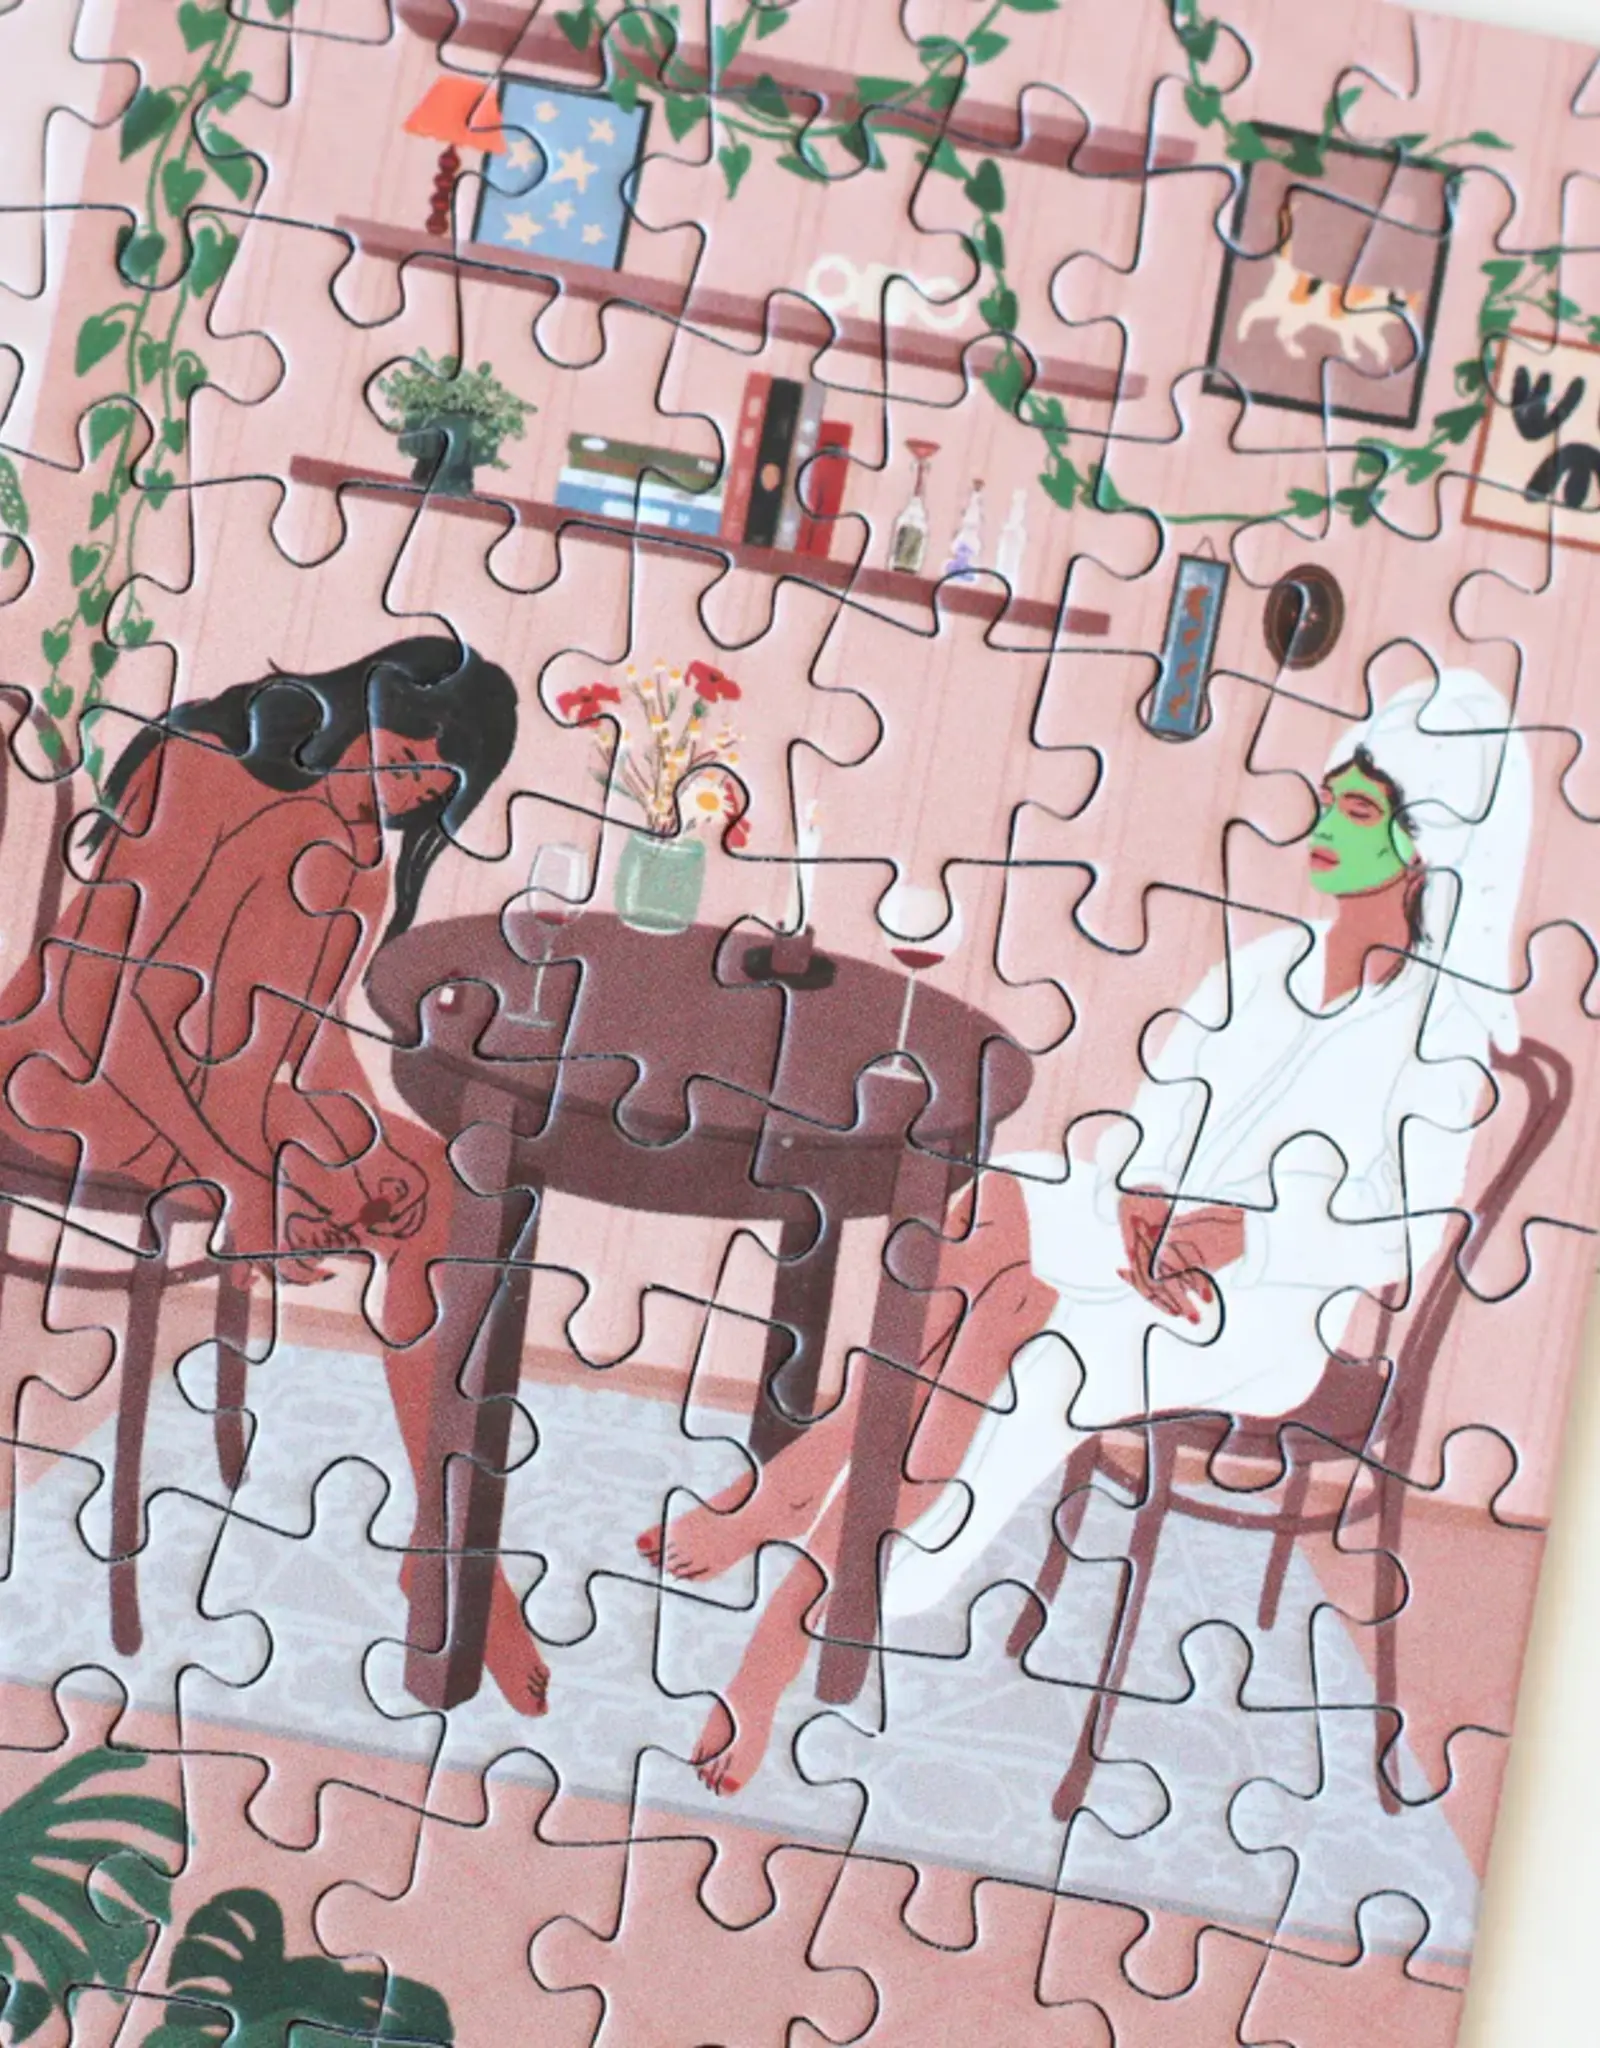 Piecely puzzle 'Homespa' - 99 pieces